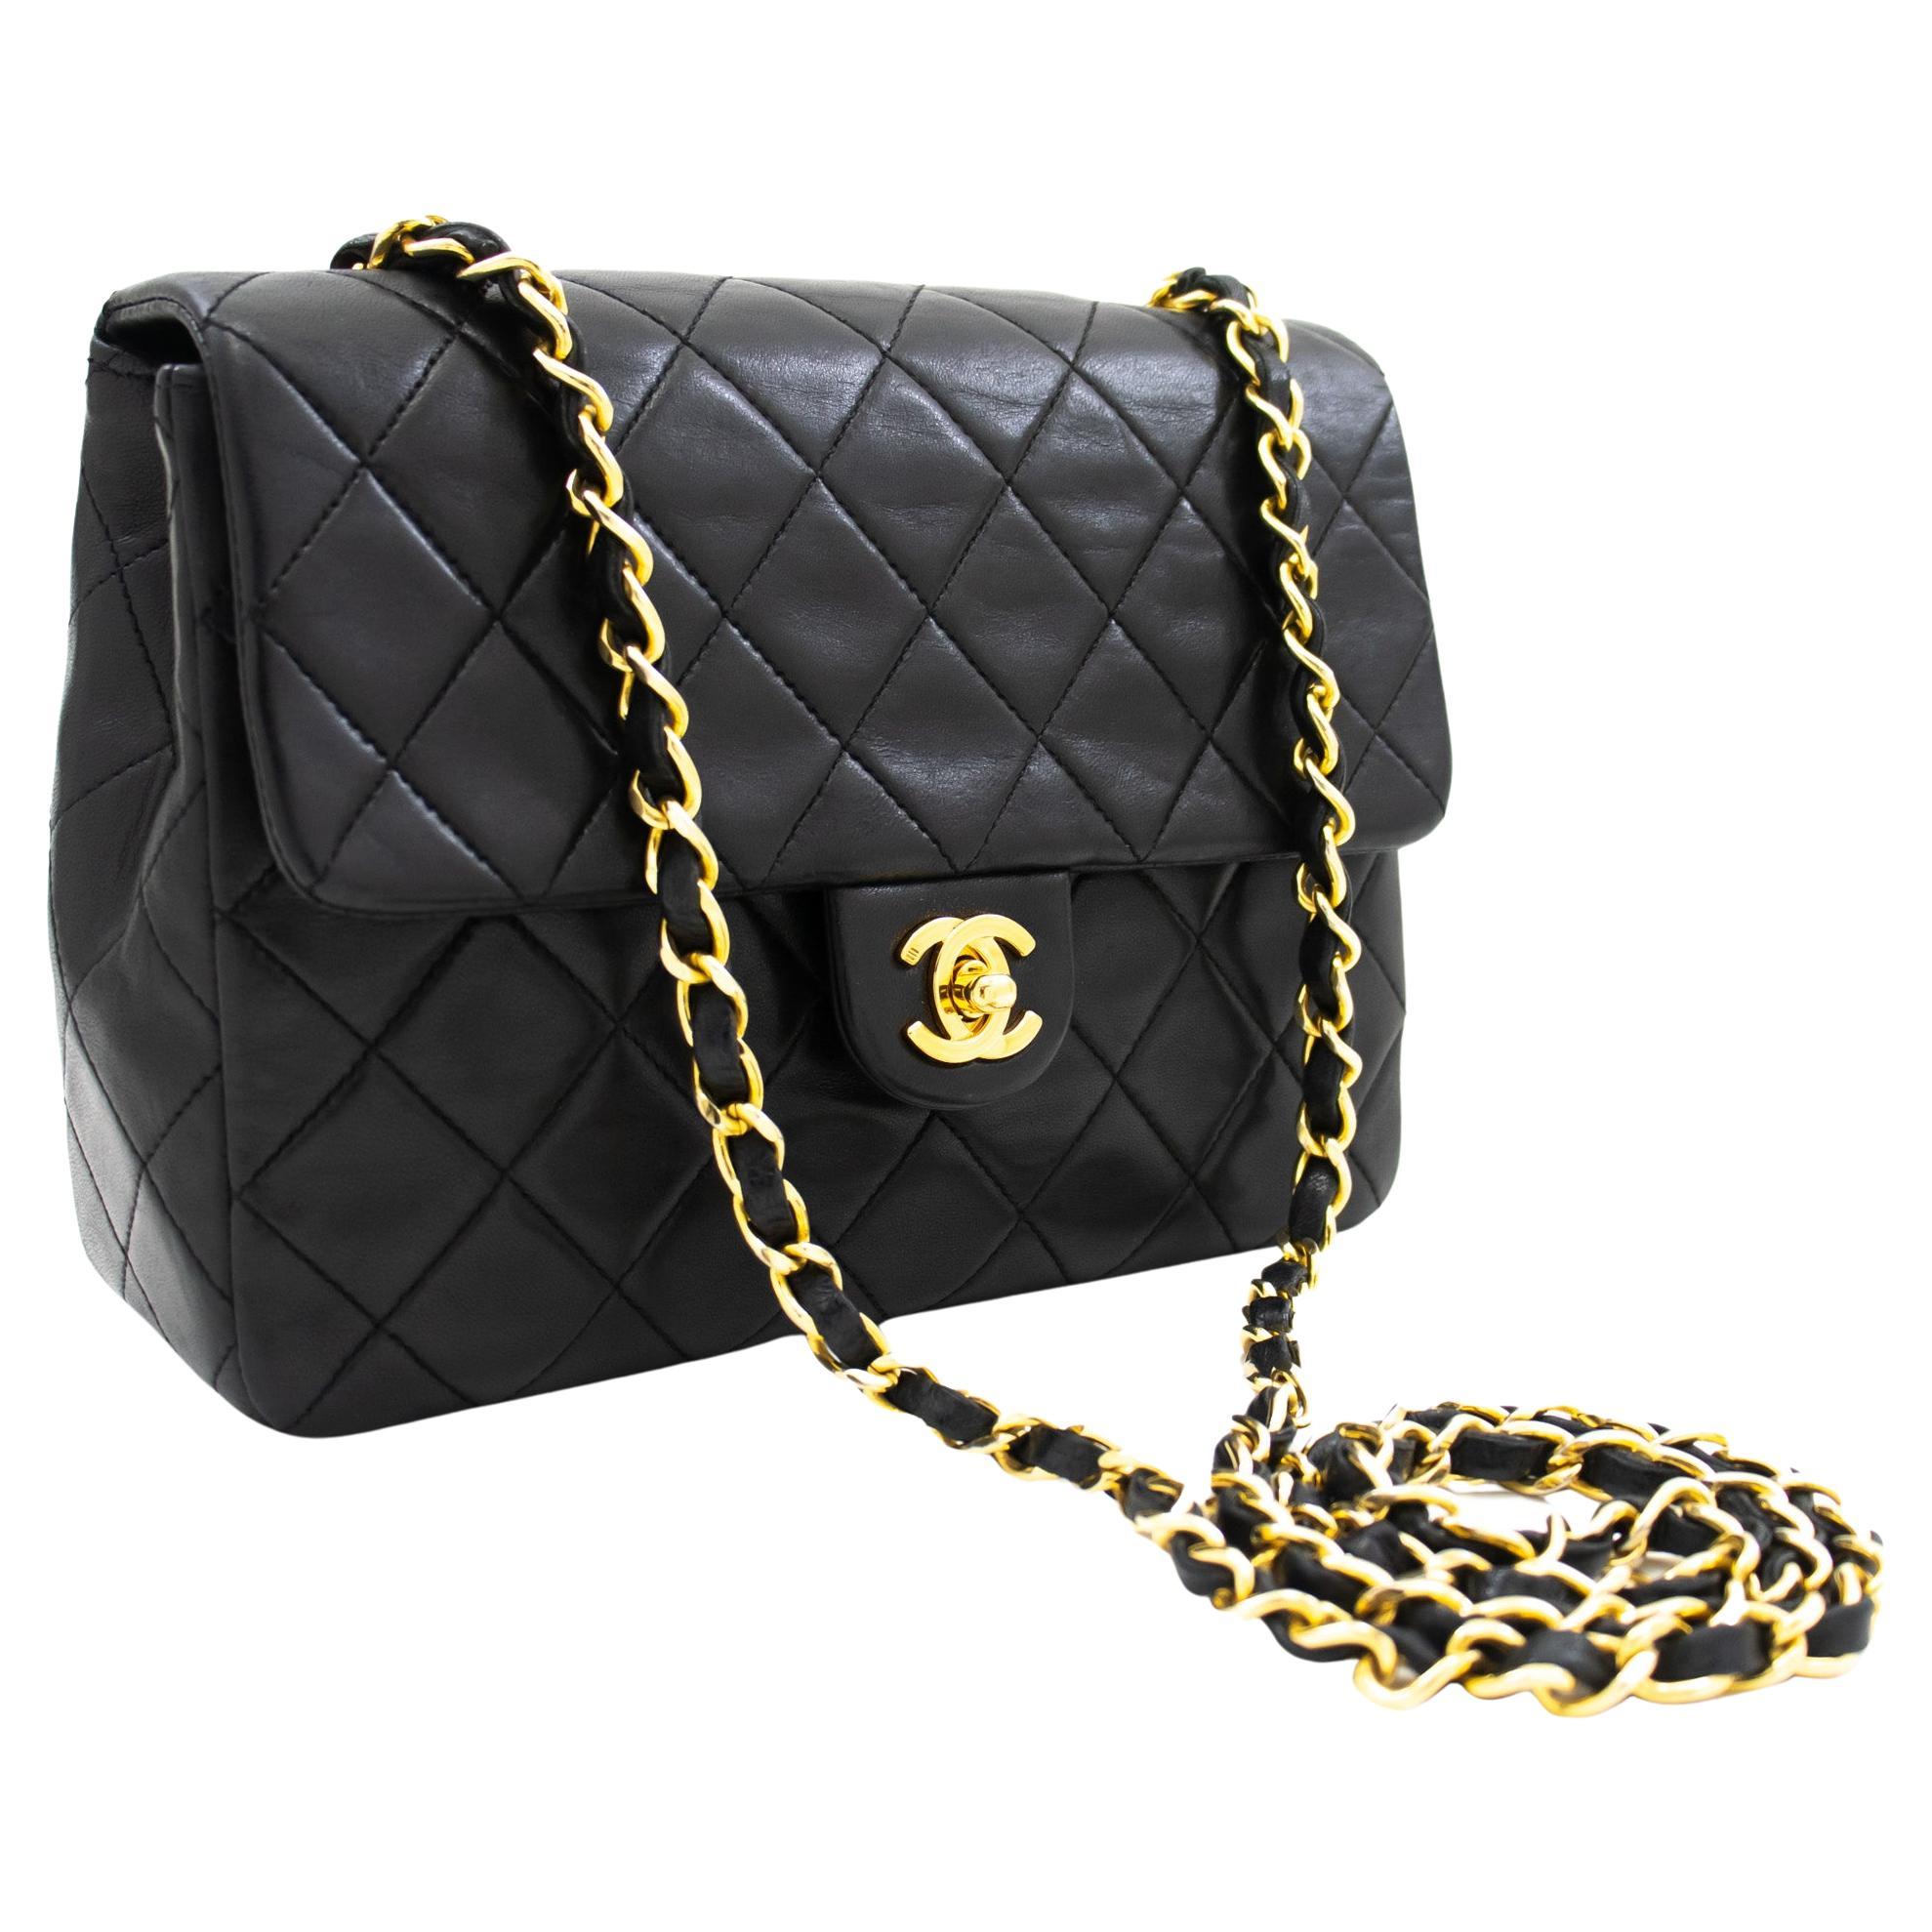 Diana leather crossbody bag Chanel Black in Leather - 35205520